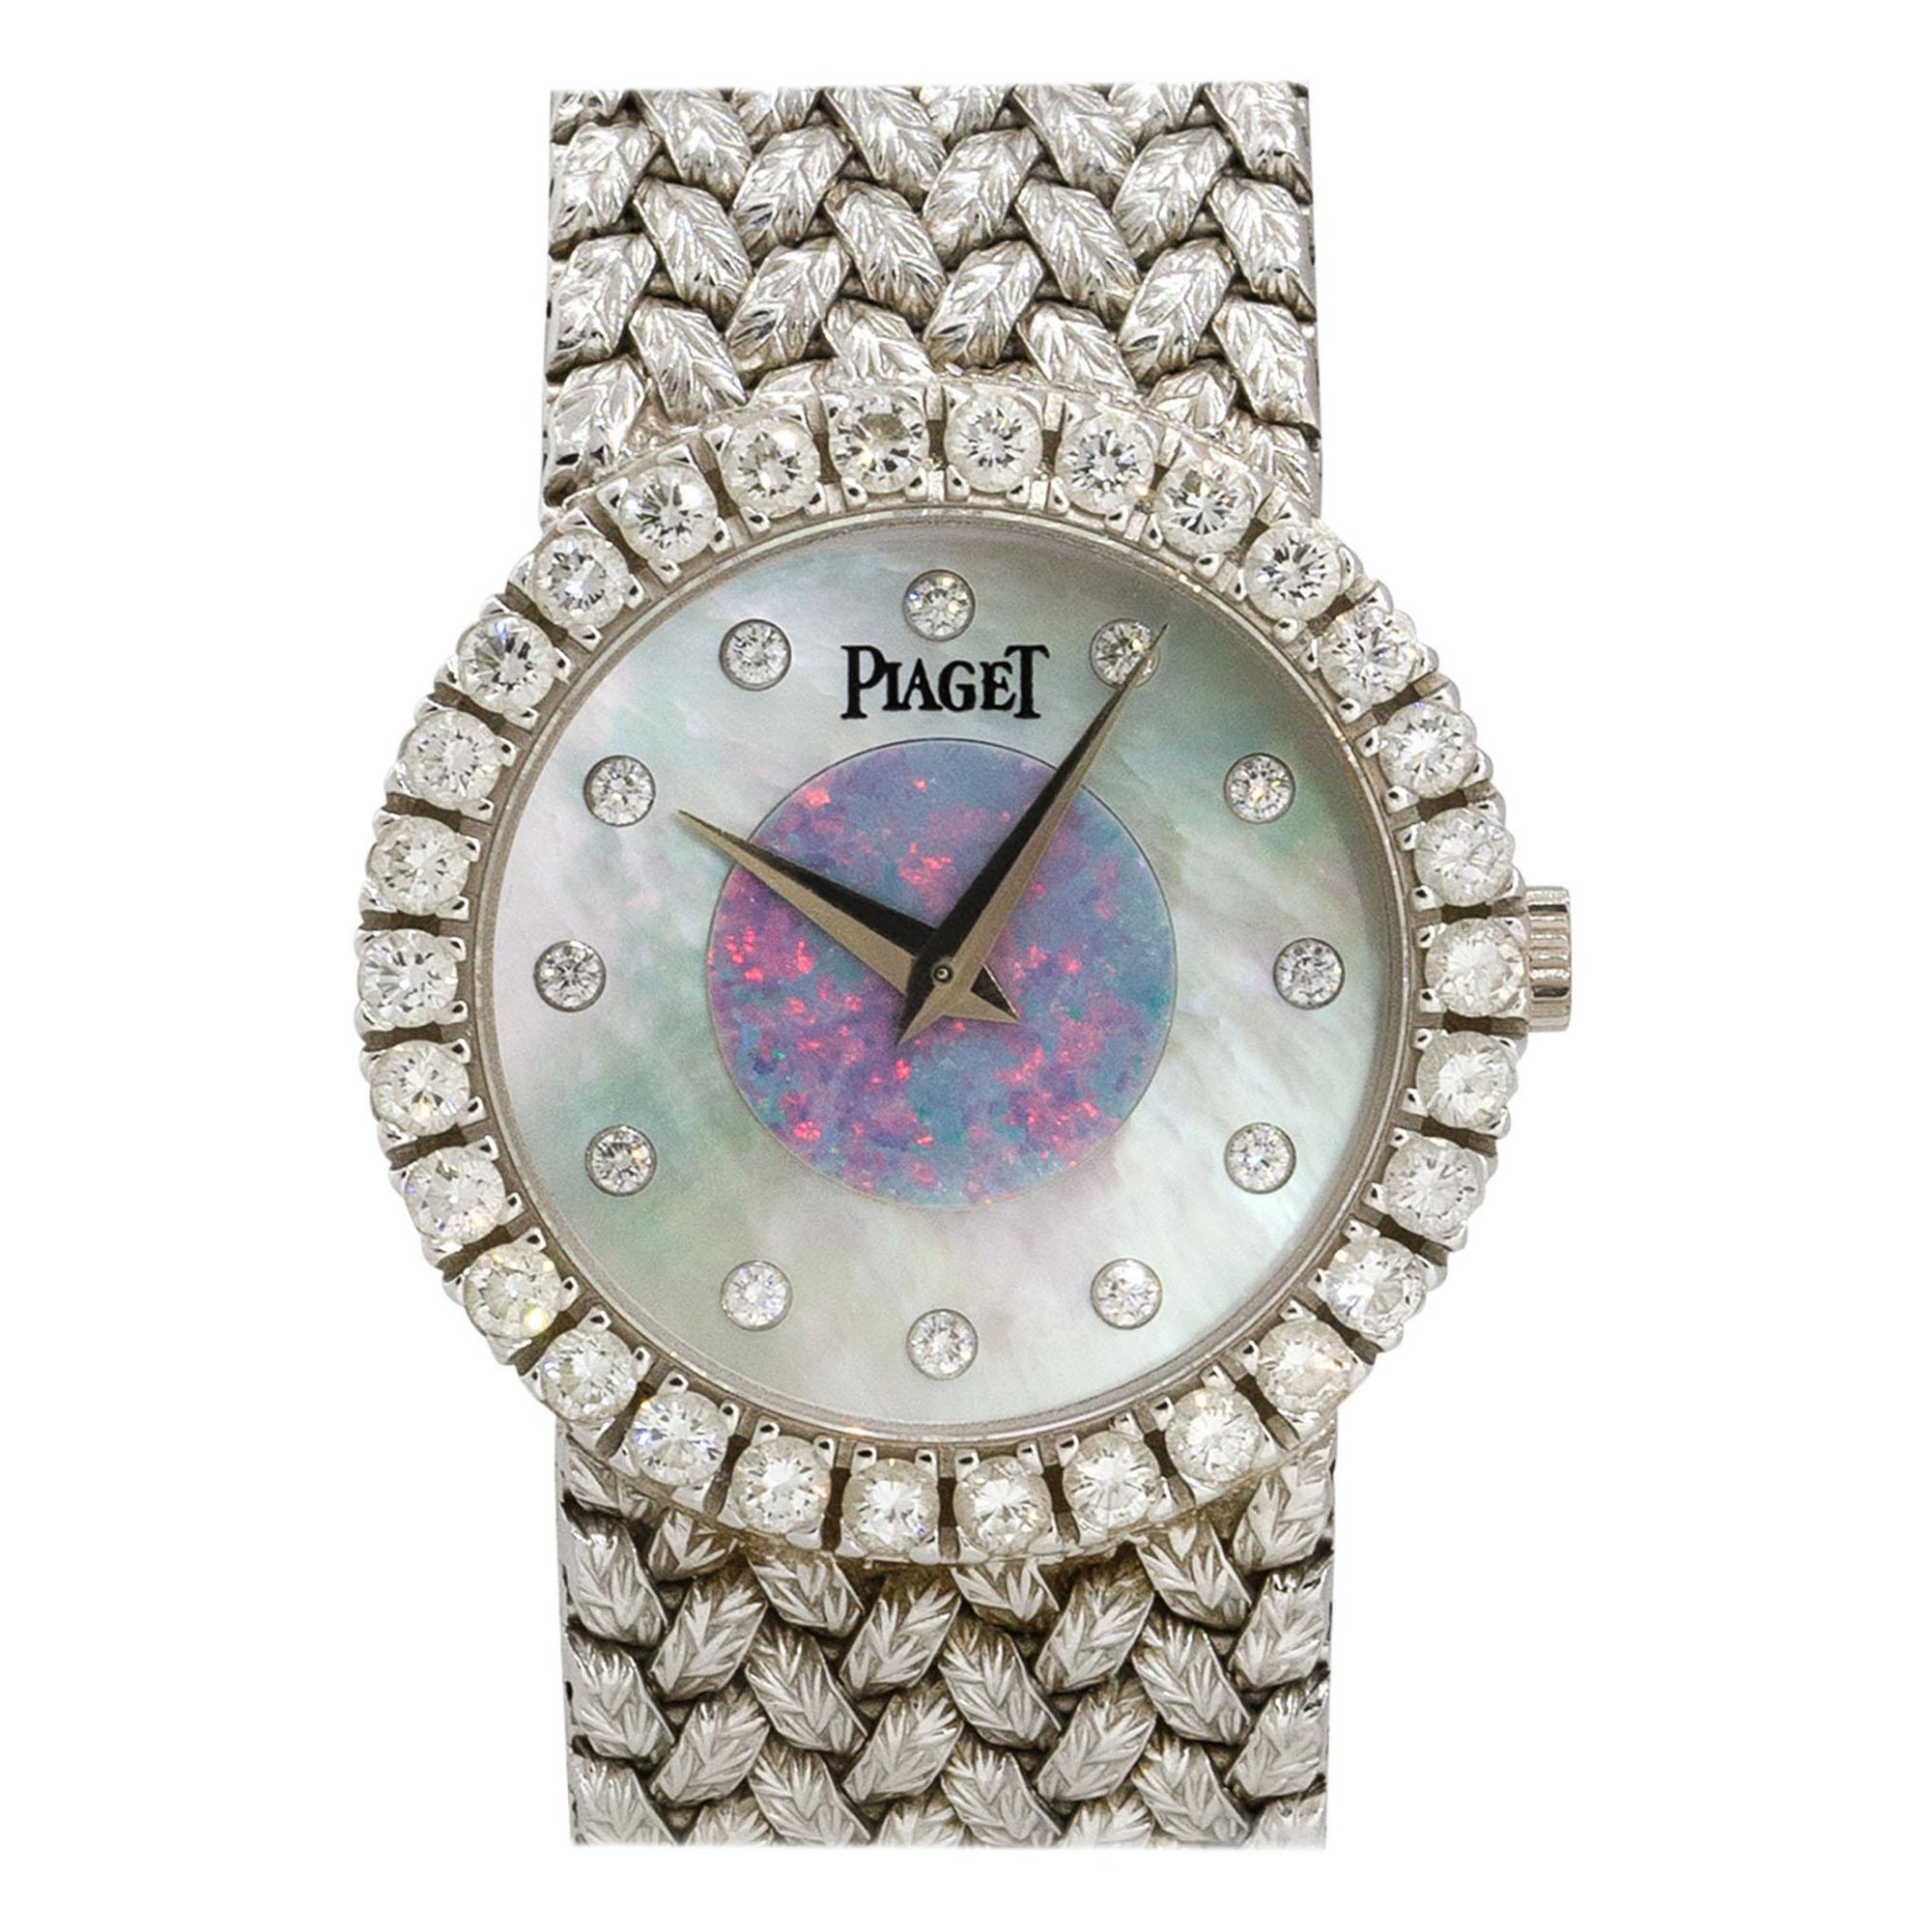 Piaget 9190d2 18k White Gold Mother of Pearl Opal Diamond Ladies Watch For Sale